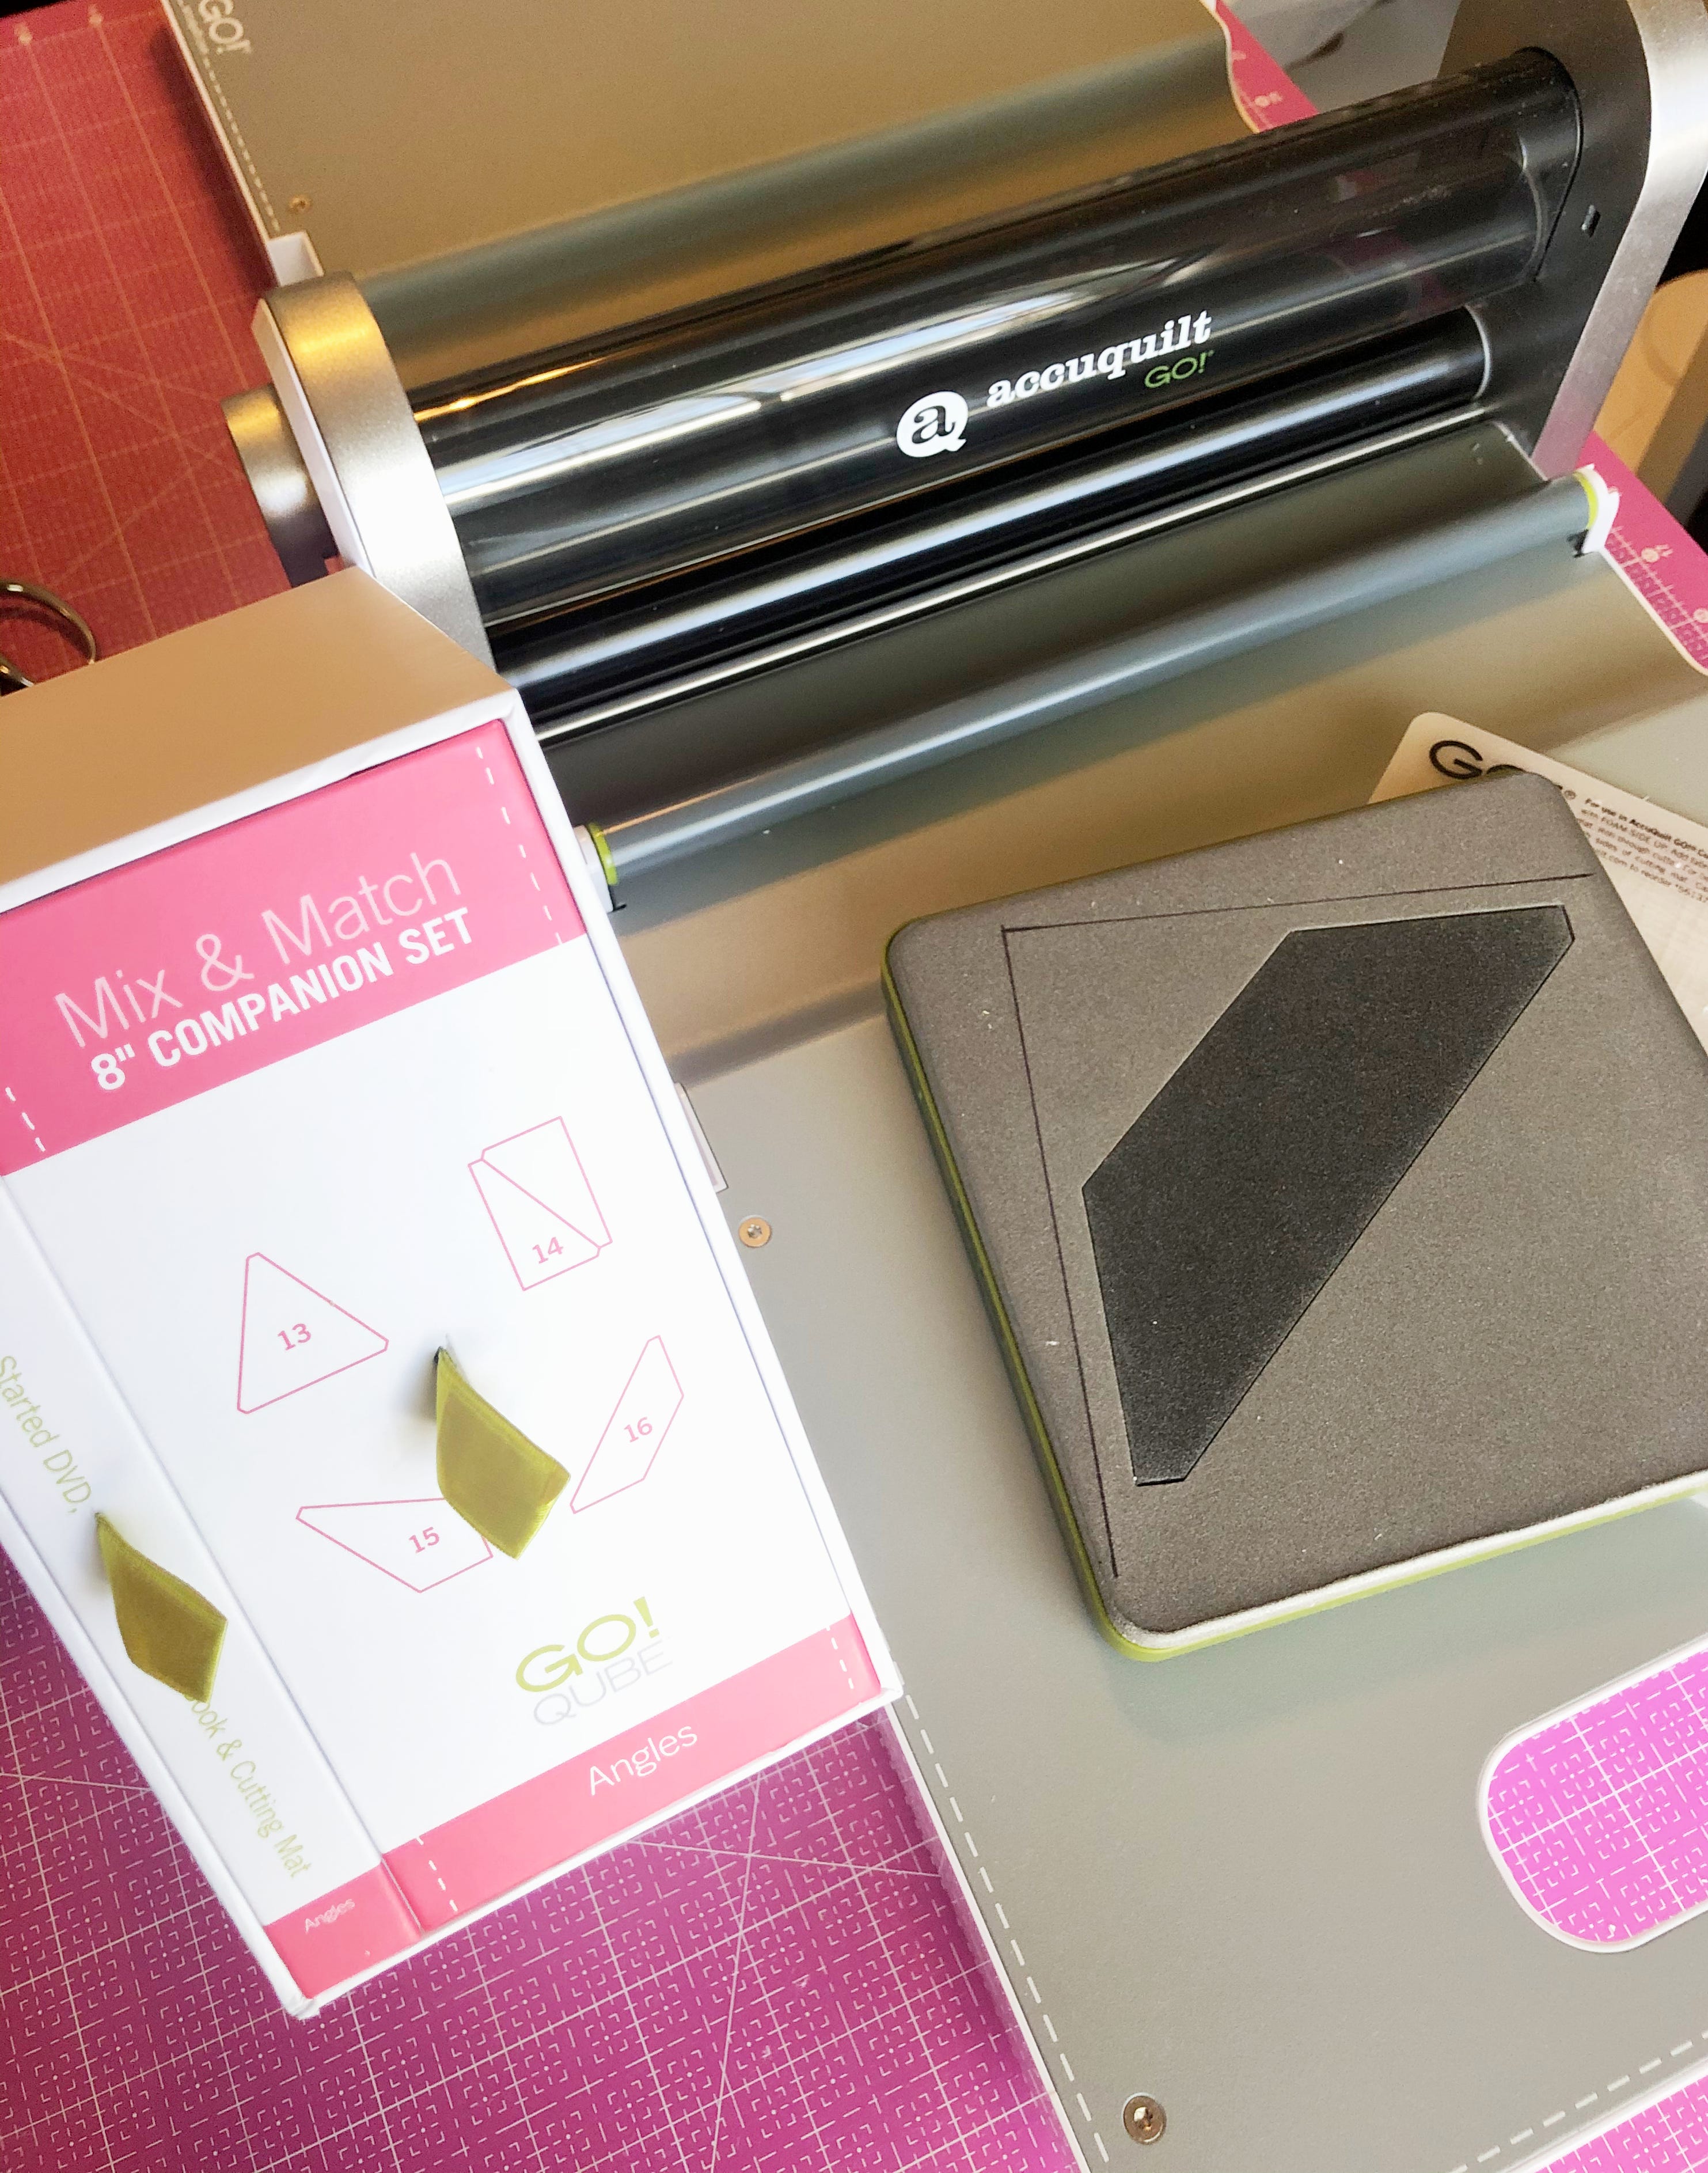 Everything You Need to Know About AccuQuilt Fabric Cutting Machines -  Homemade Emily Jane